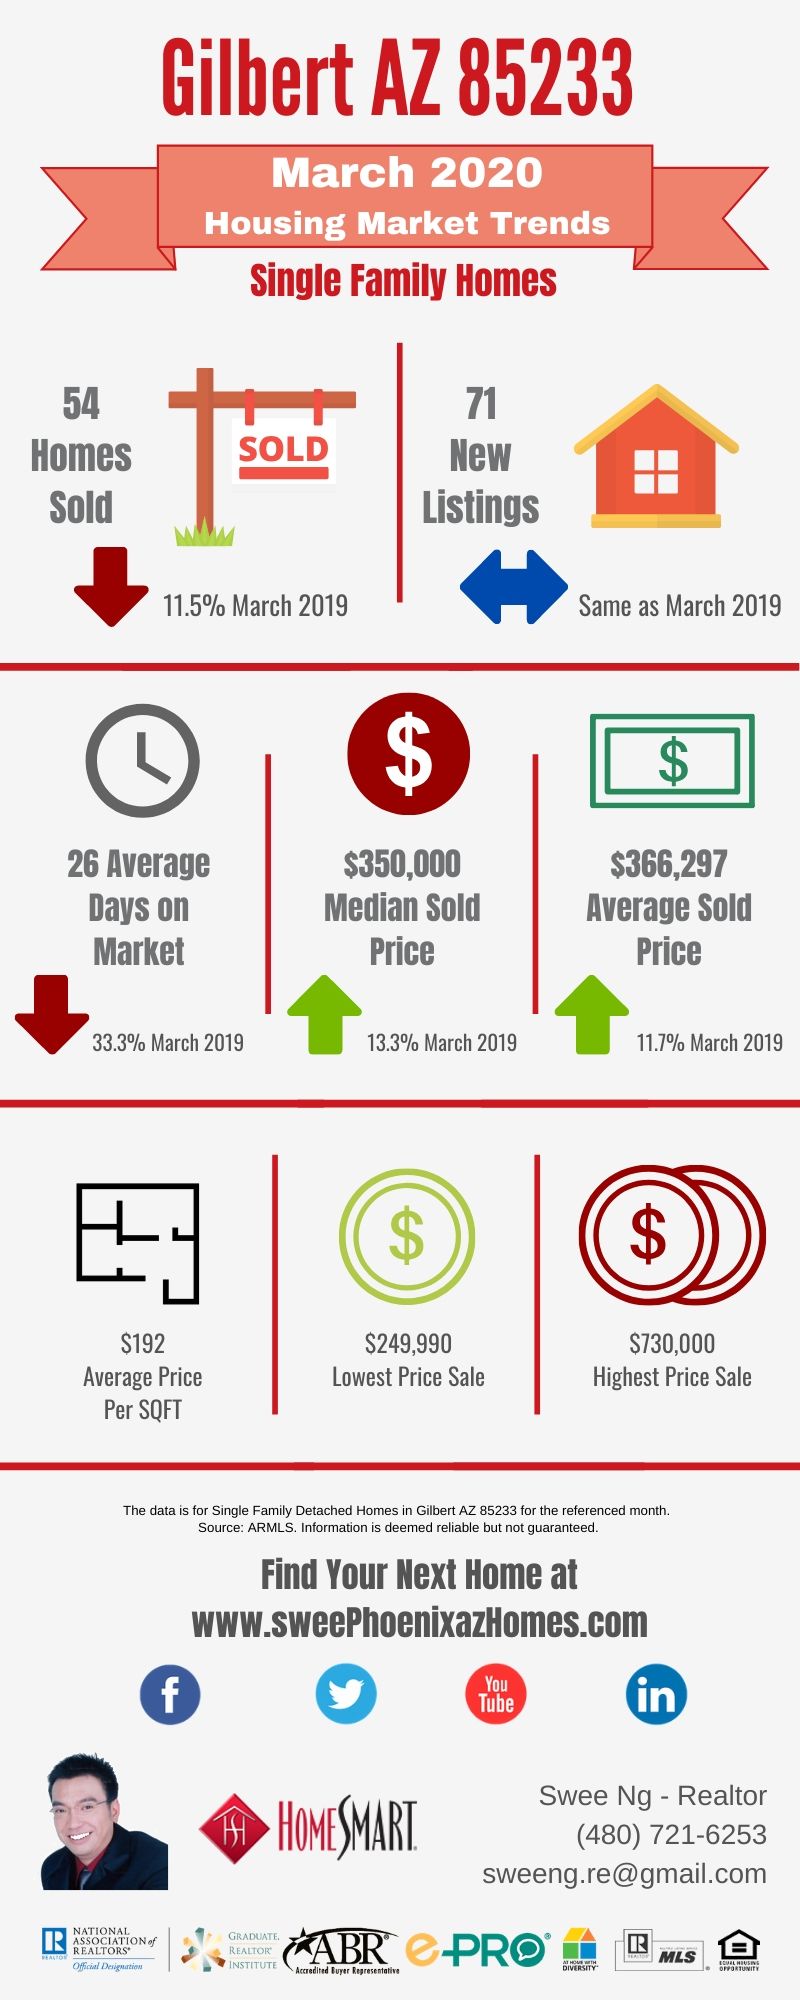 Gilbert AZ 85233 Housing Market Trends Report March 2020 by Swee Ng, Real Estate and House Value